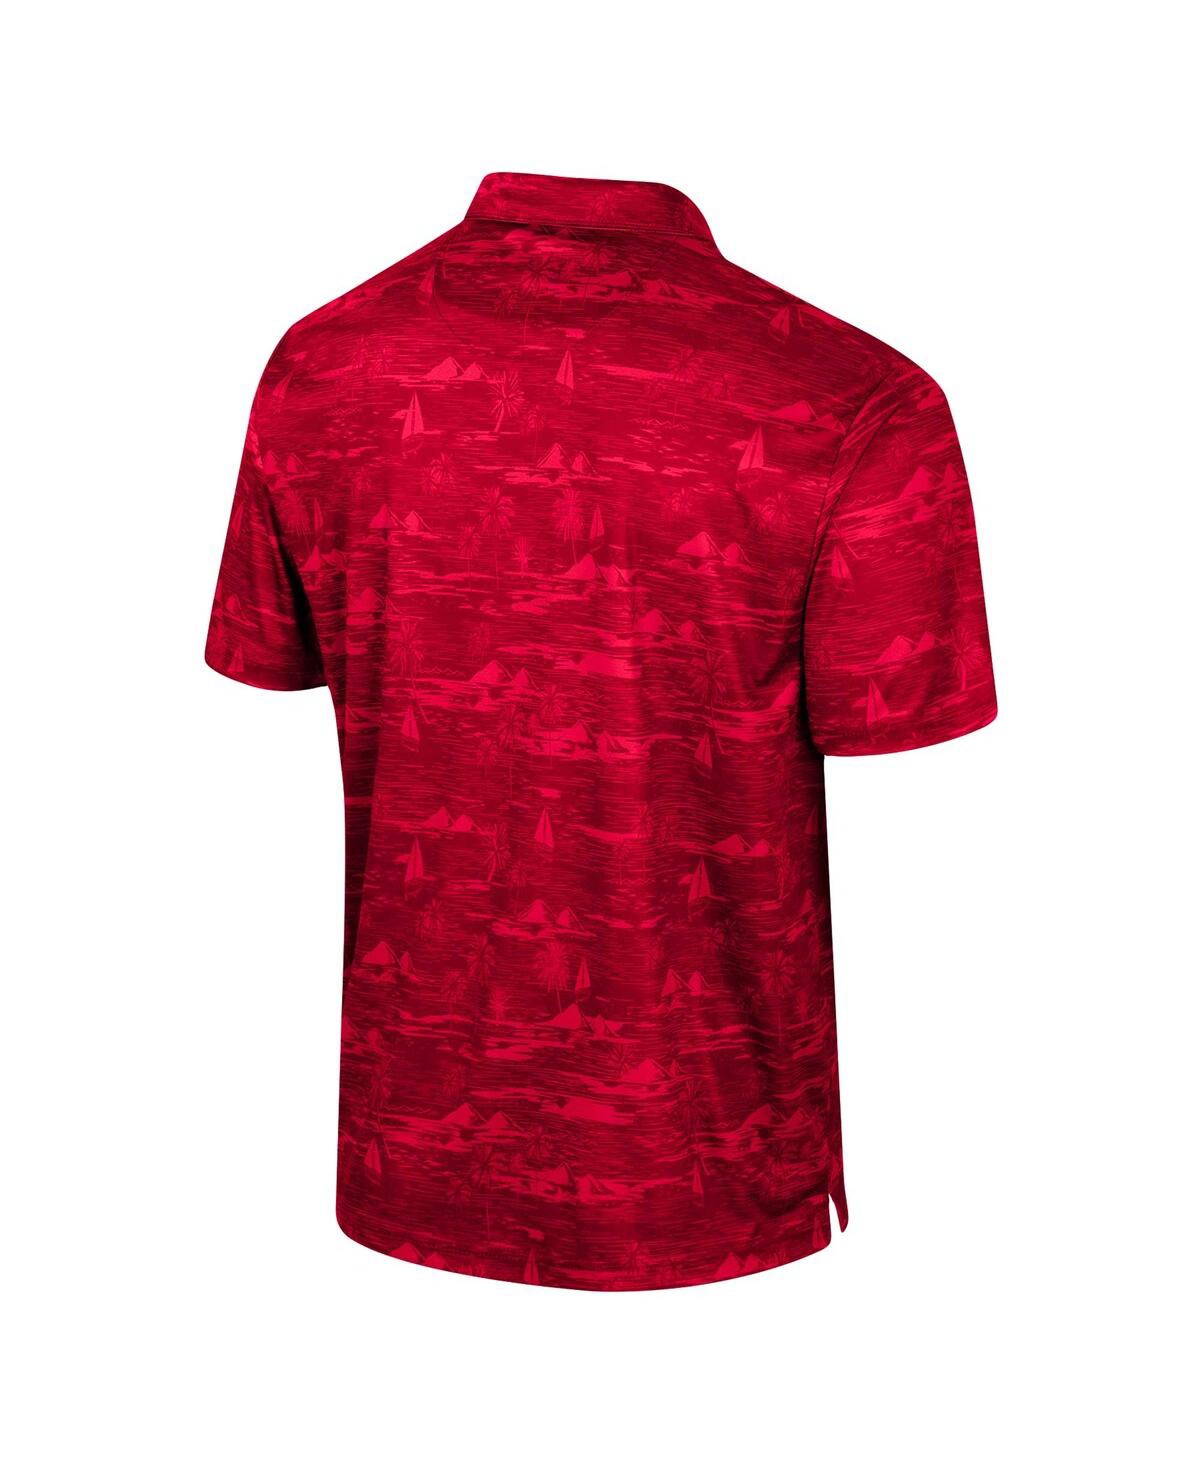 Shop Colosseum Men's Scarlet Rutgers Scarlet Knights Daly Print Polo